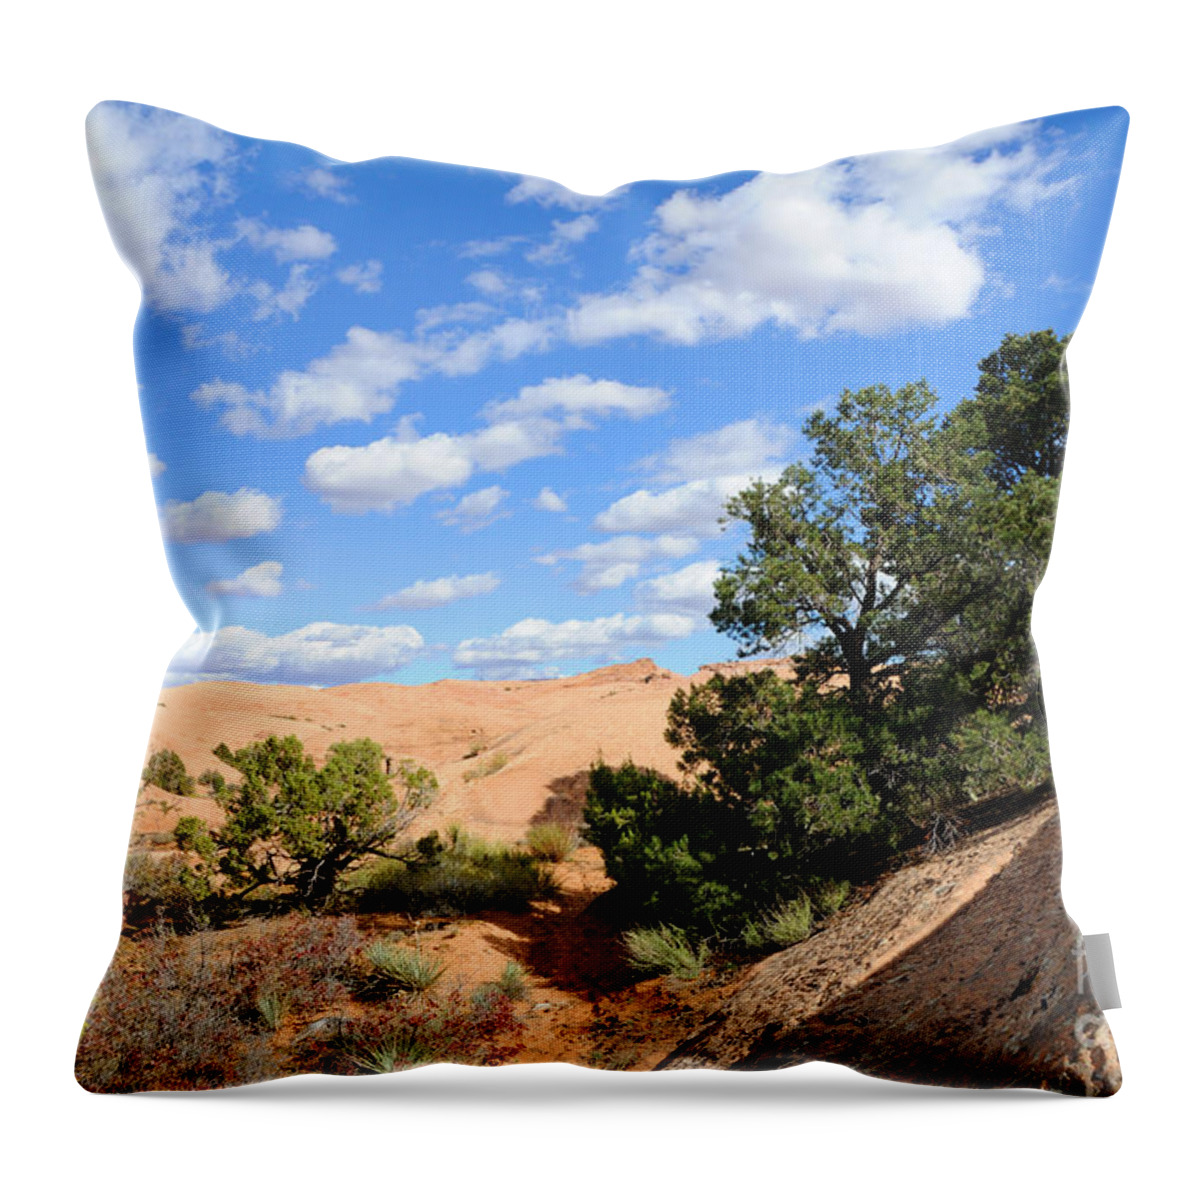 Sand Throw Pillow featuring the photograph Sandstone Sky by Gary Whitton